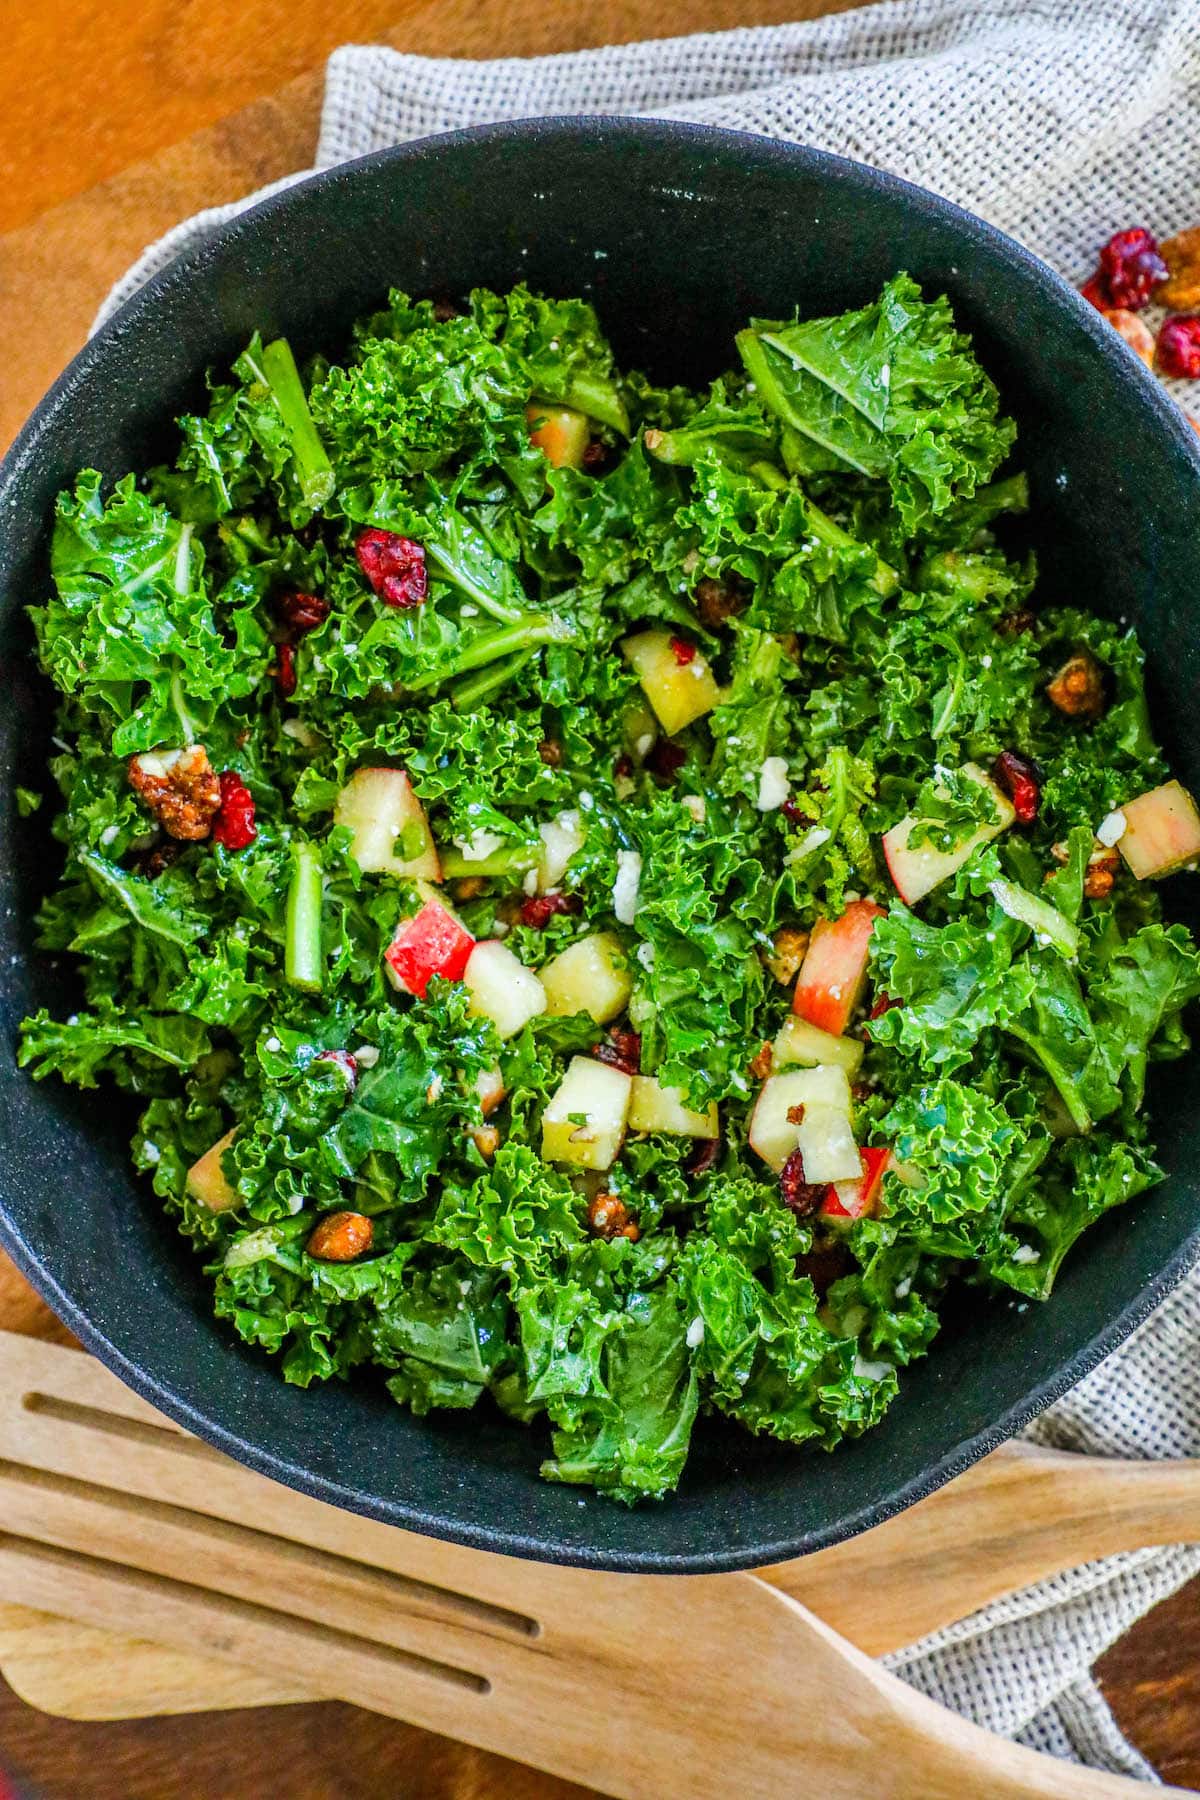 bright green kale, craisins, chopped apples, walnuts, and feta cheese crumbles tossed in dressing in a black bowl on a table next to wooden spoons